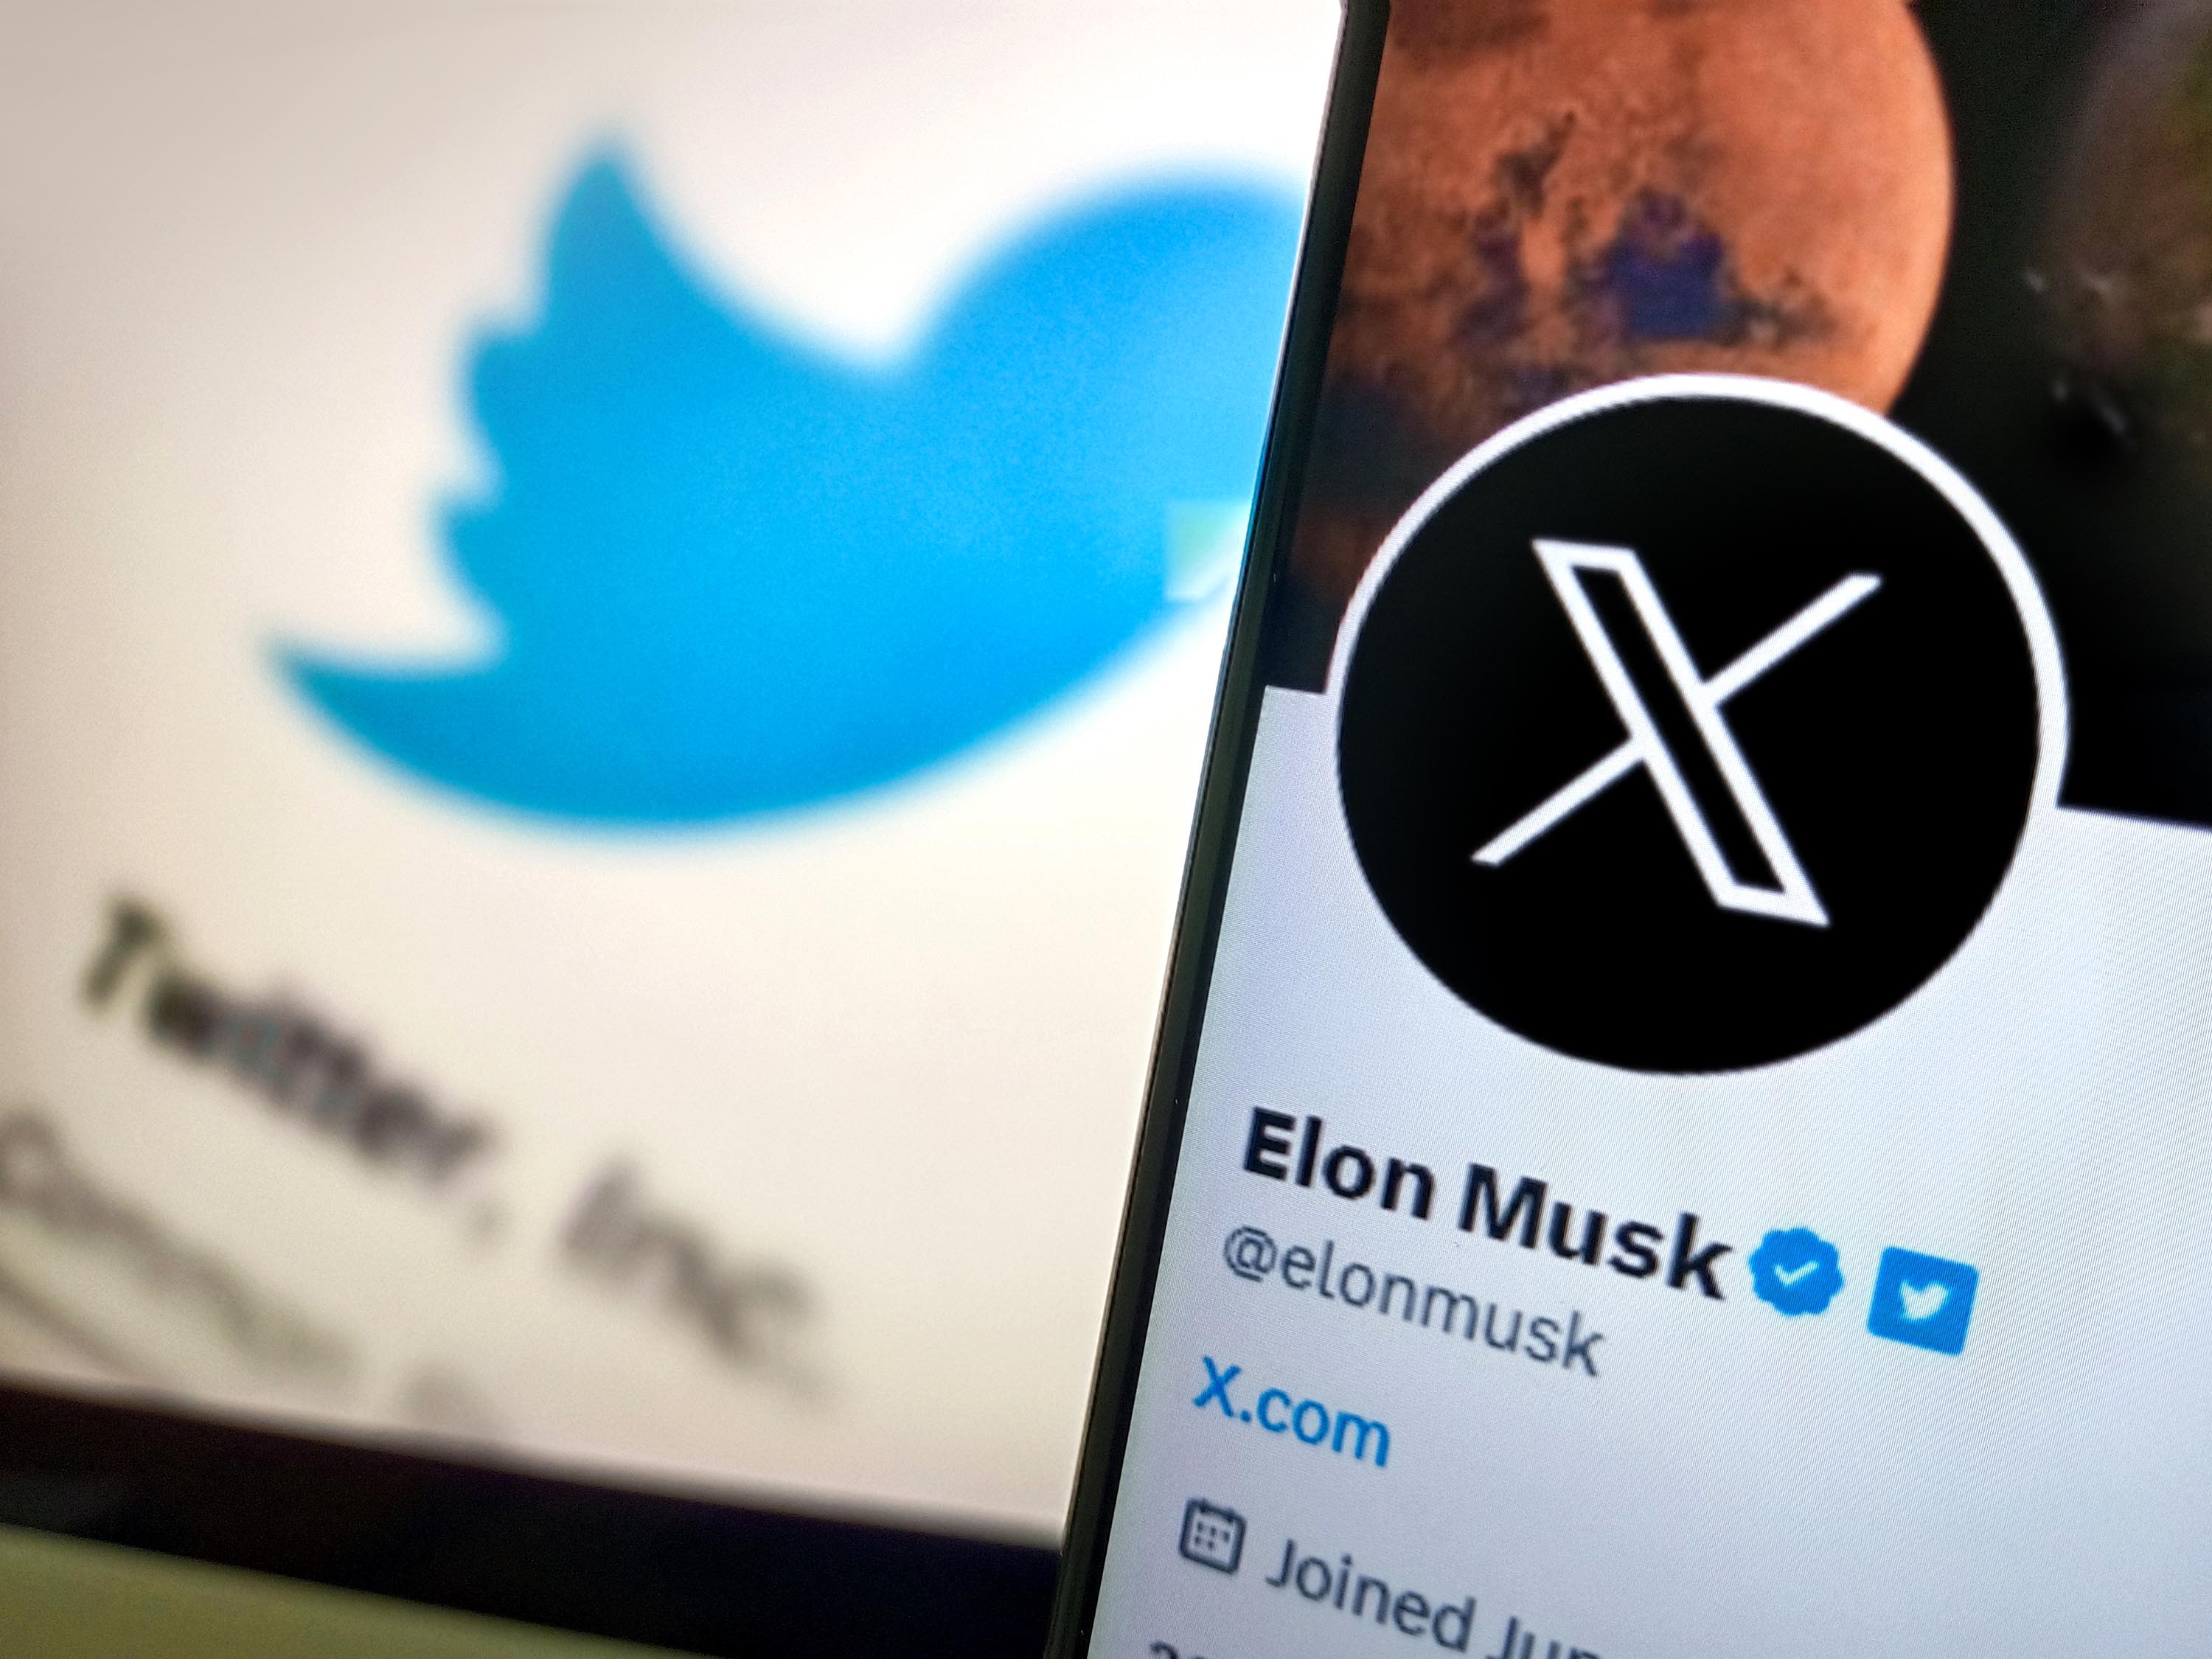 Twitter's rebrand is the next stage in Elon Musk's vision for the company.  But does anyone want it? | CNN Business